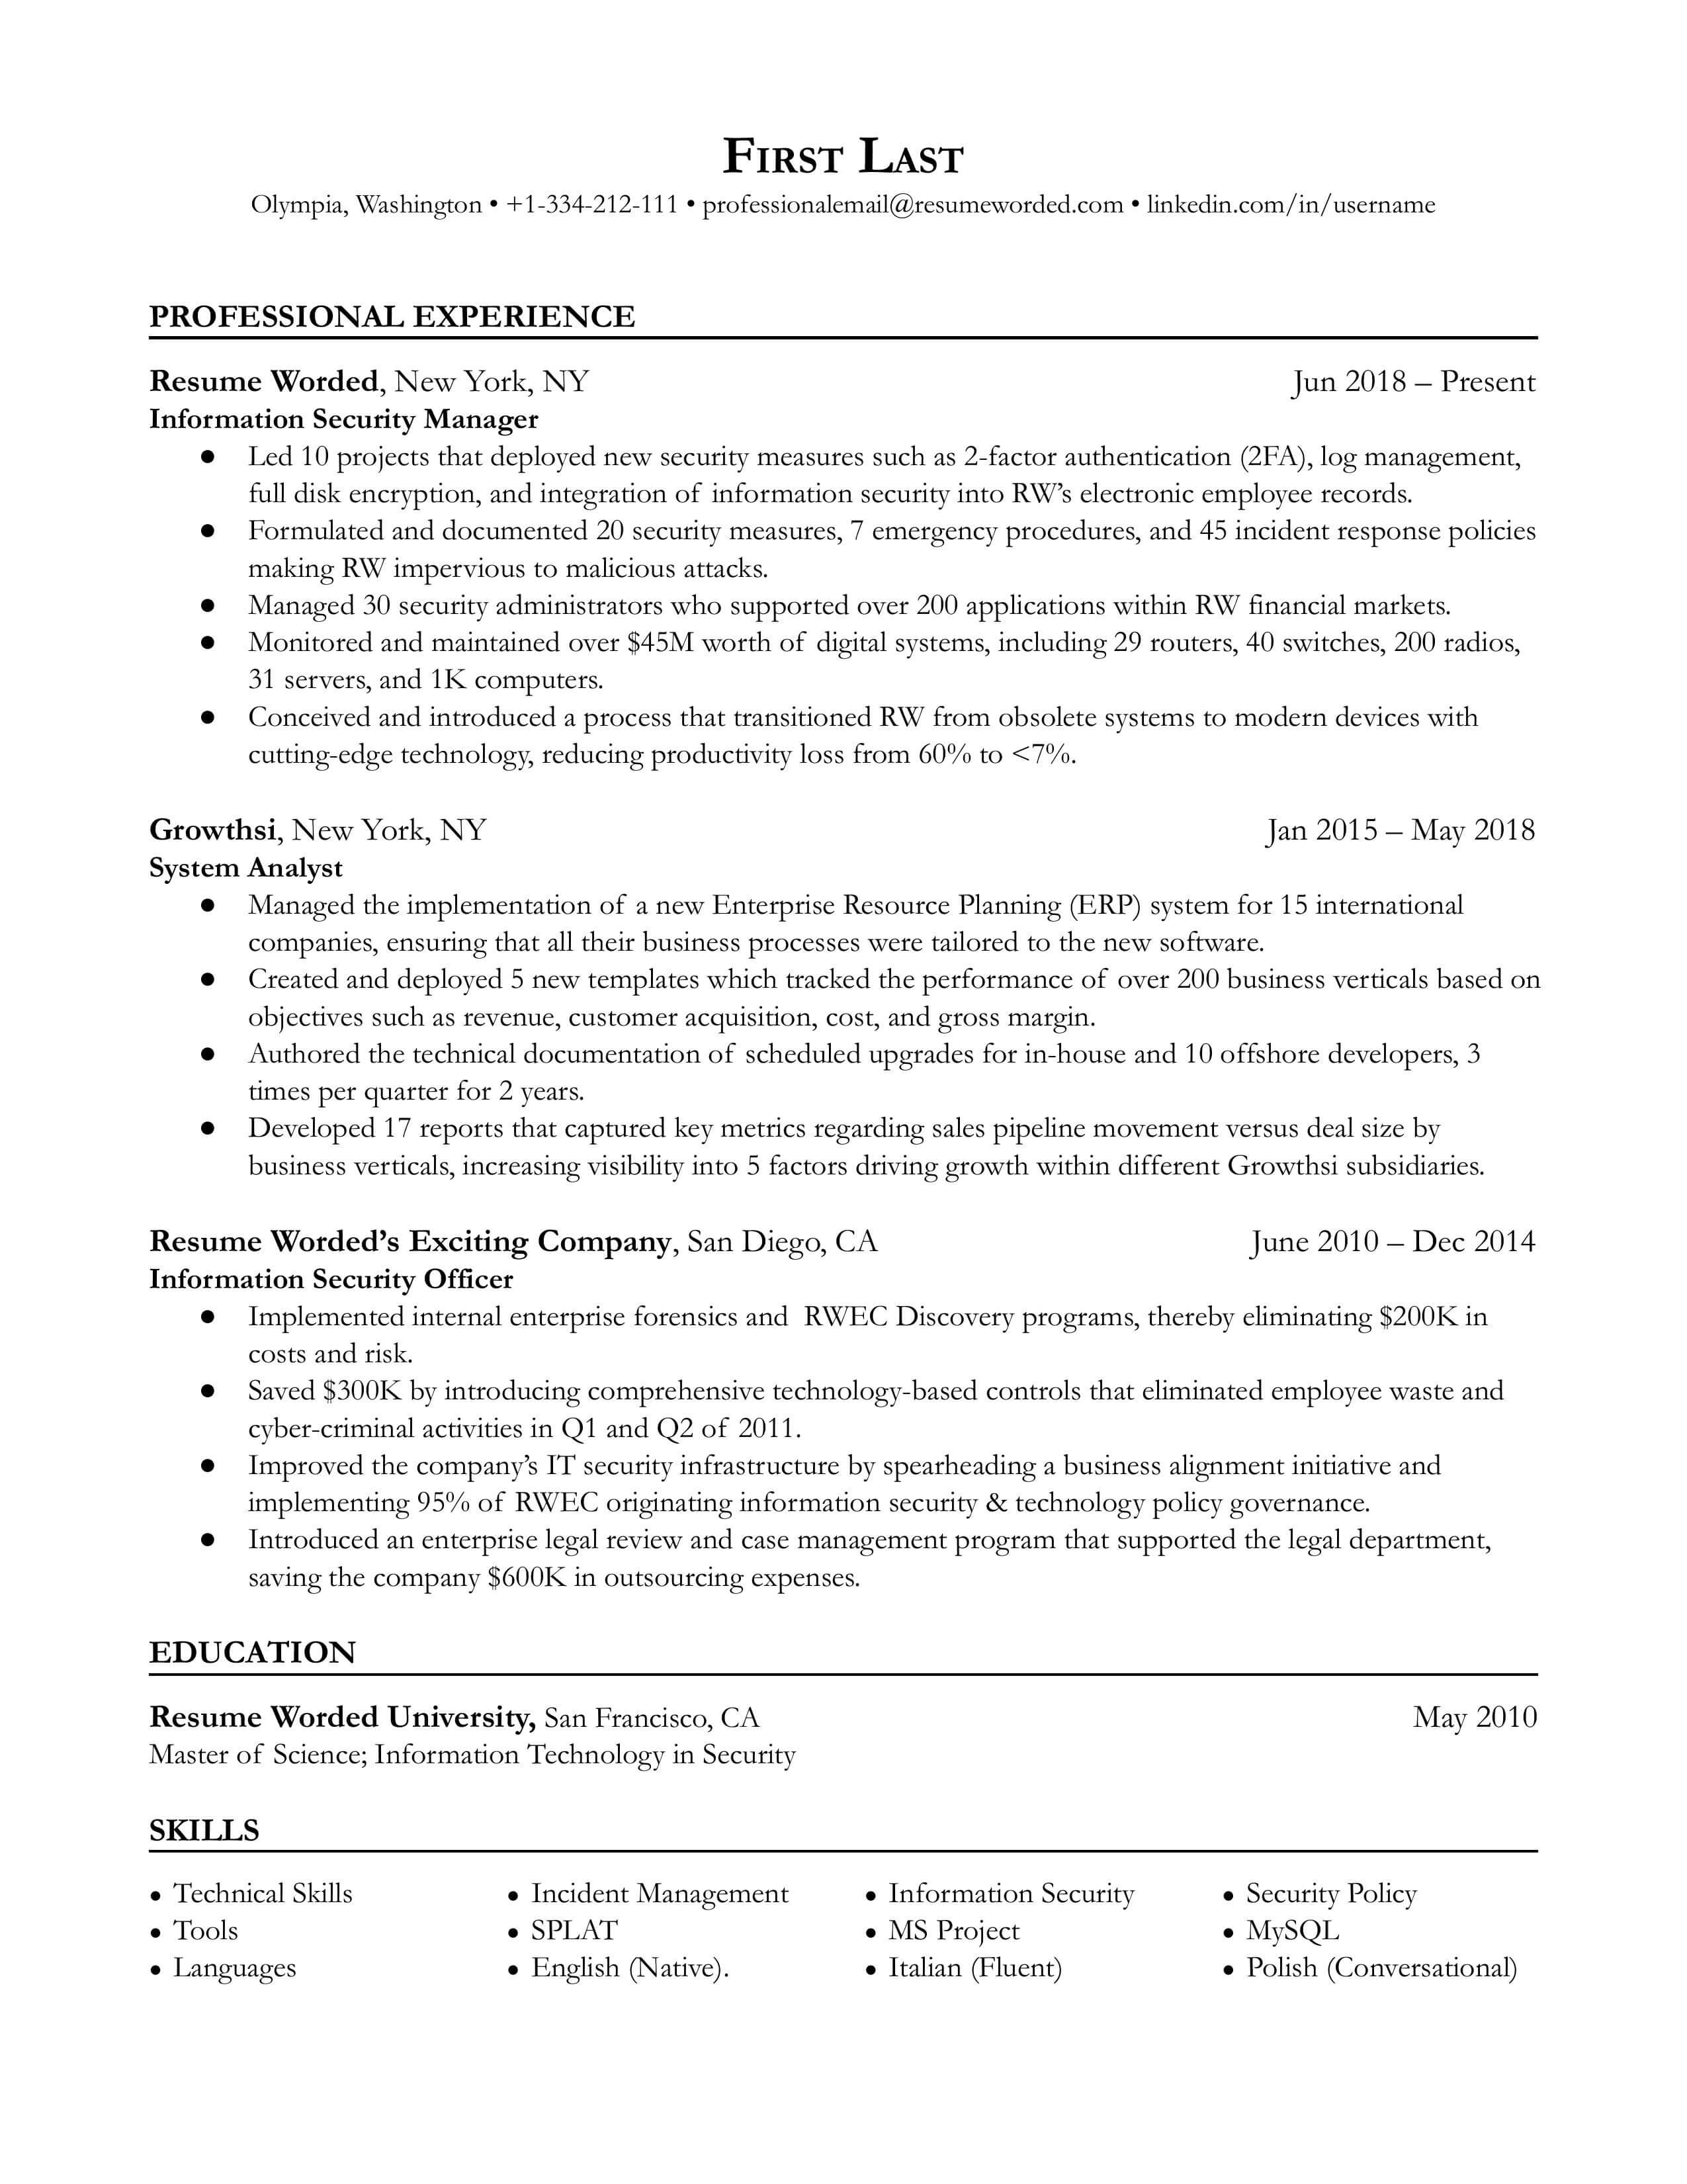 A CV detailing the skills, experiences and certifications of an Information Security Manager.